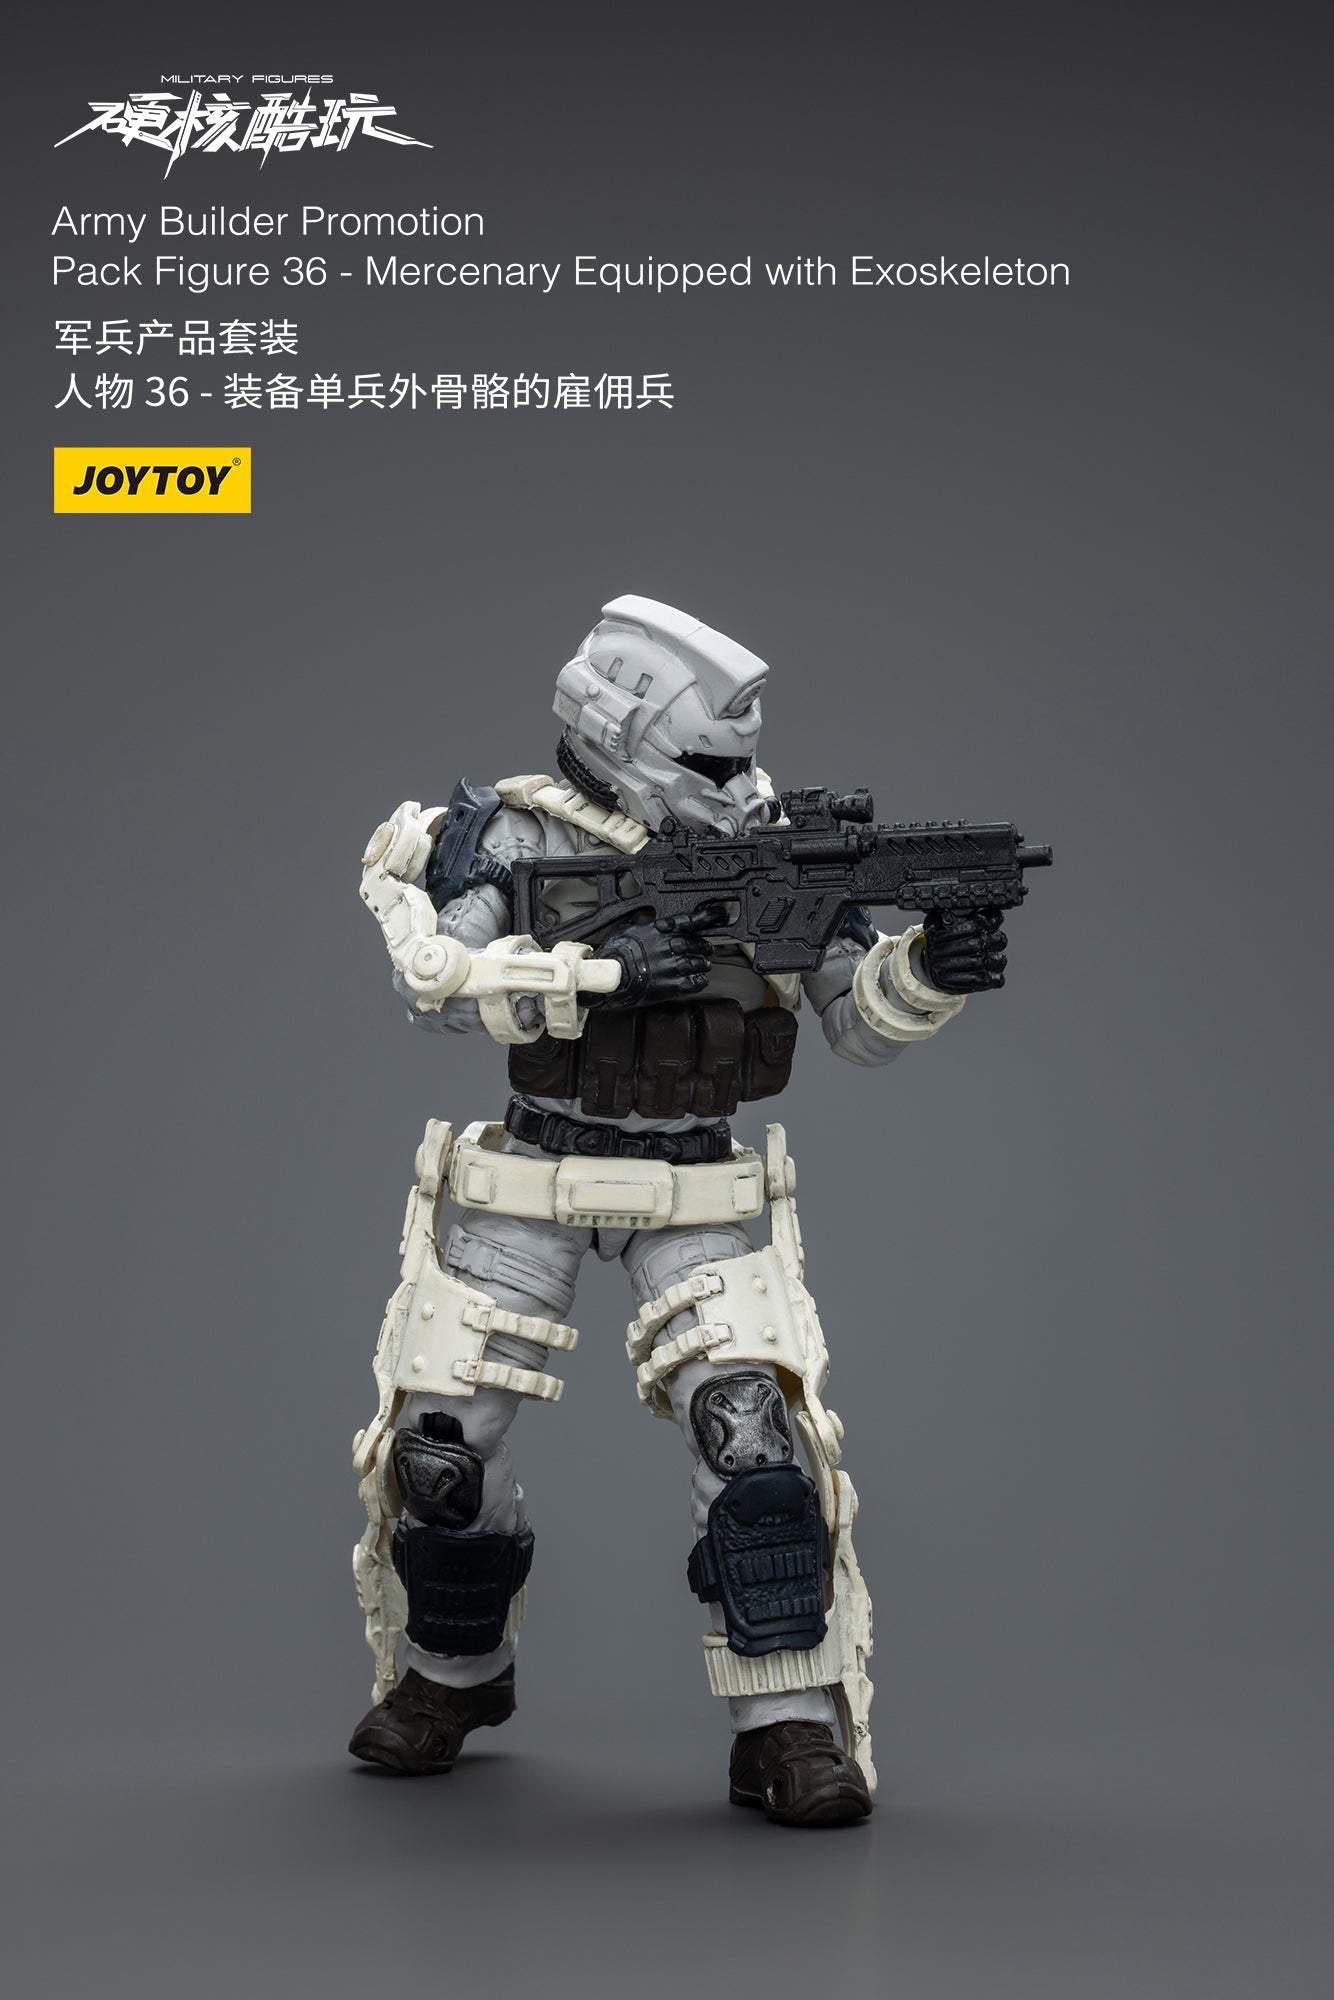 Army Builder Promotion Pack Figure 36 -Mercenary Equipped with Exoskeleton - Soldiers Action Figure By JOYTOY